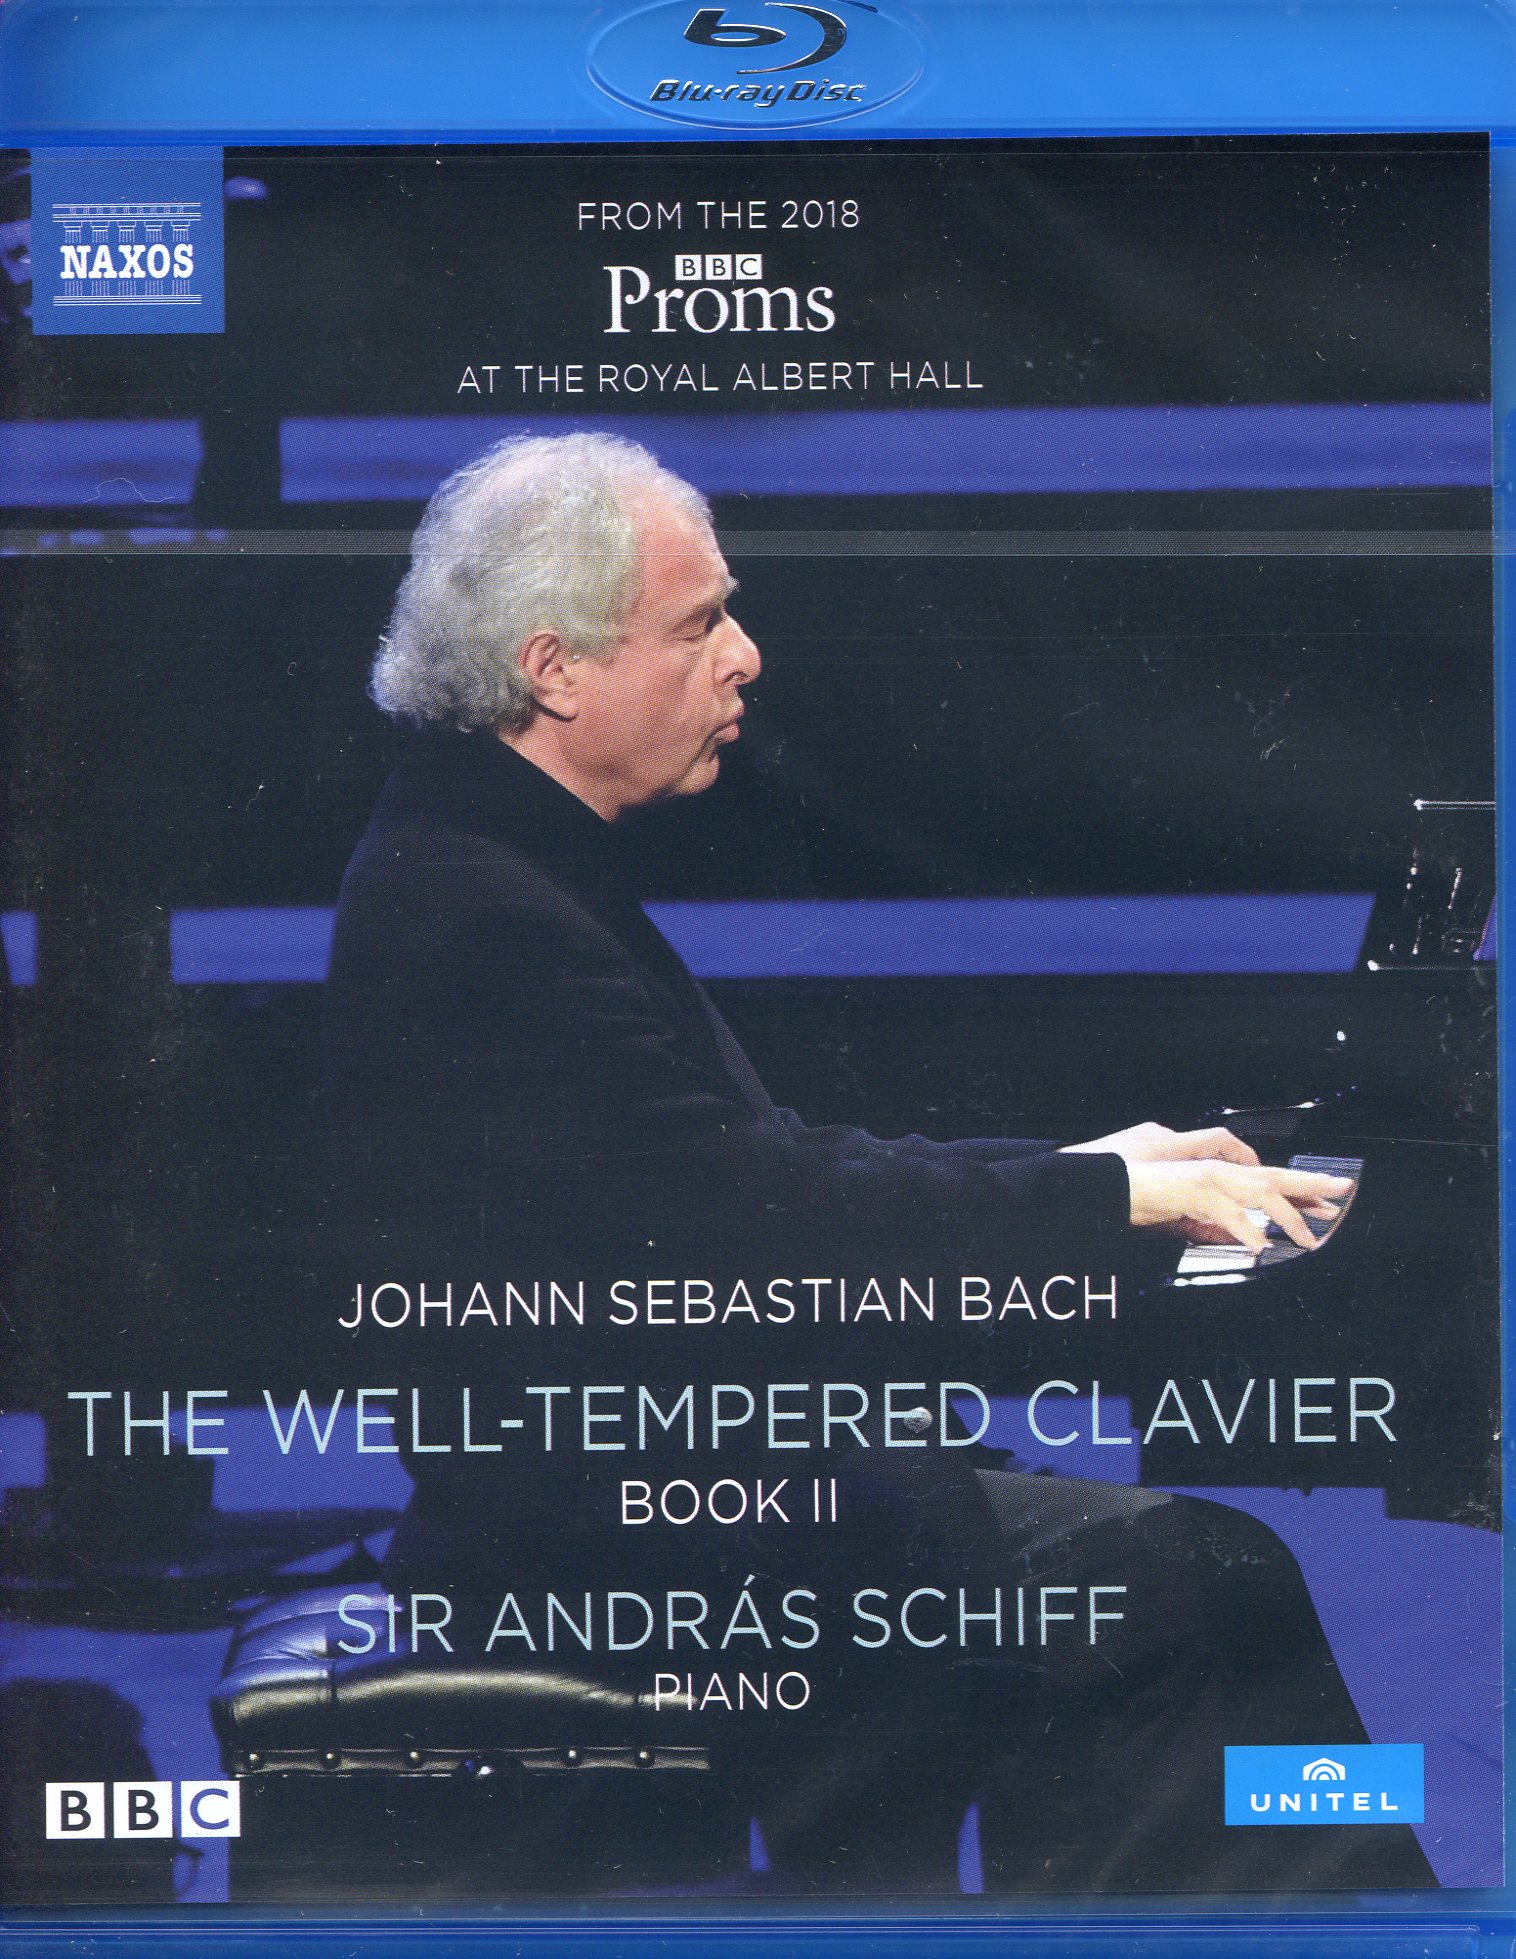 [BD]BACH: THE WELL-TEMPERED CLAVIER BOOKII - SIR ANDRAS SCHIFF